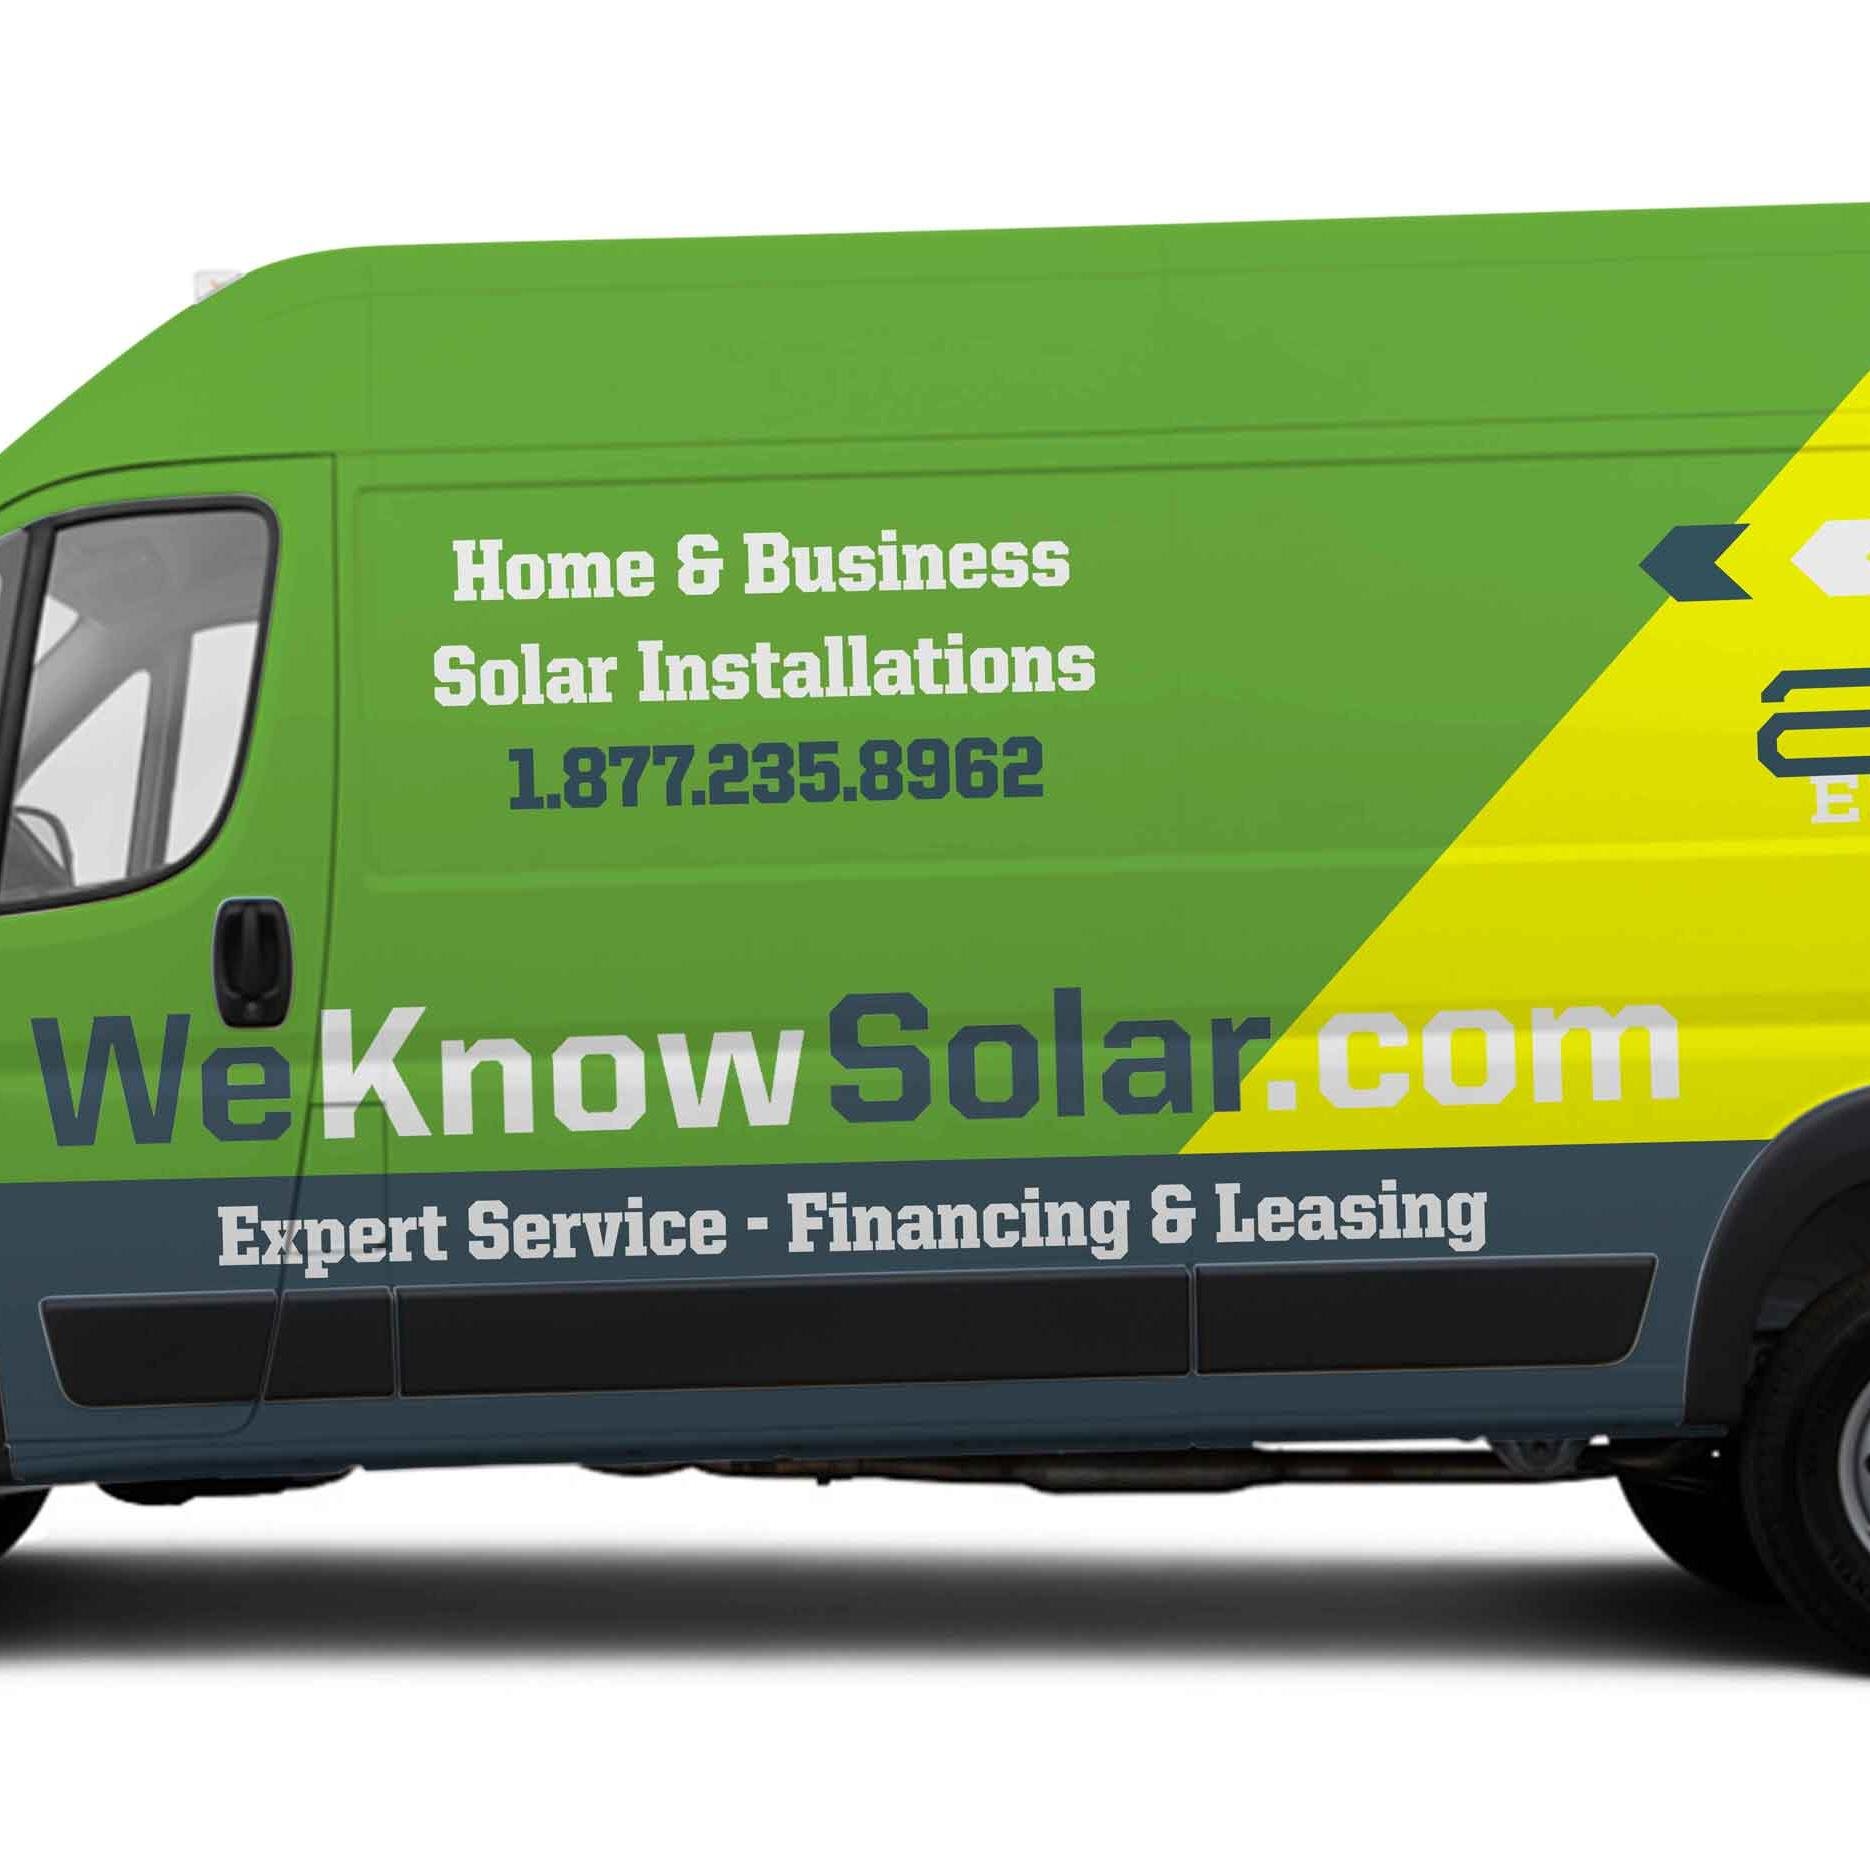 #WeKnowSolar is a home and business solar panel installer serving MN and WI. Providing high technological solar PV systems. Headquartered out of Oakdale, MN.